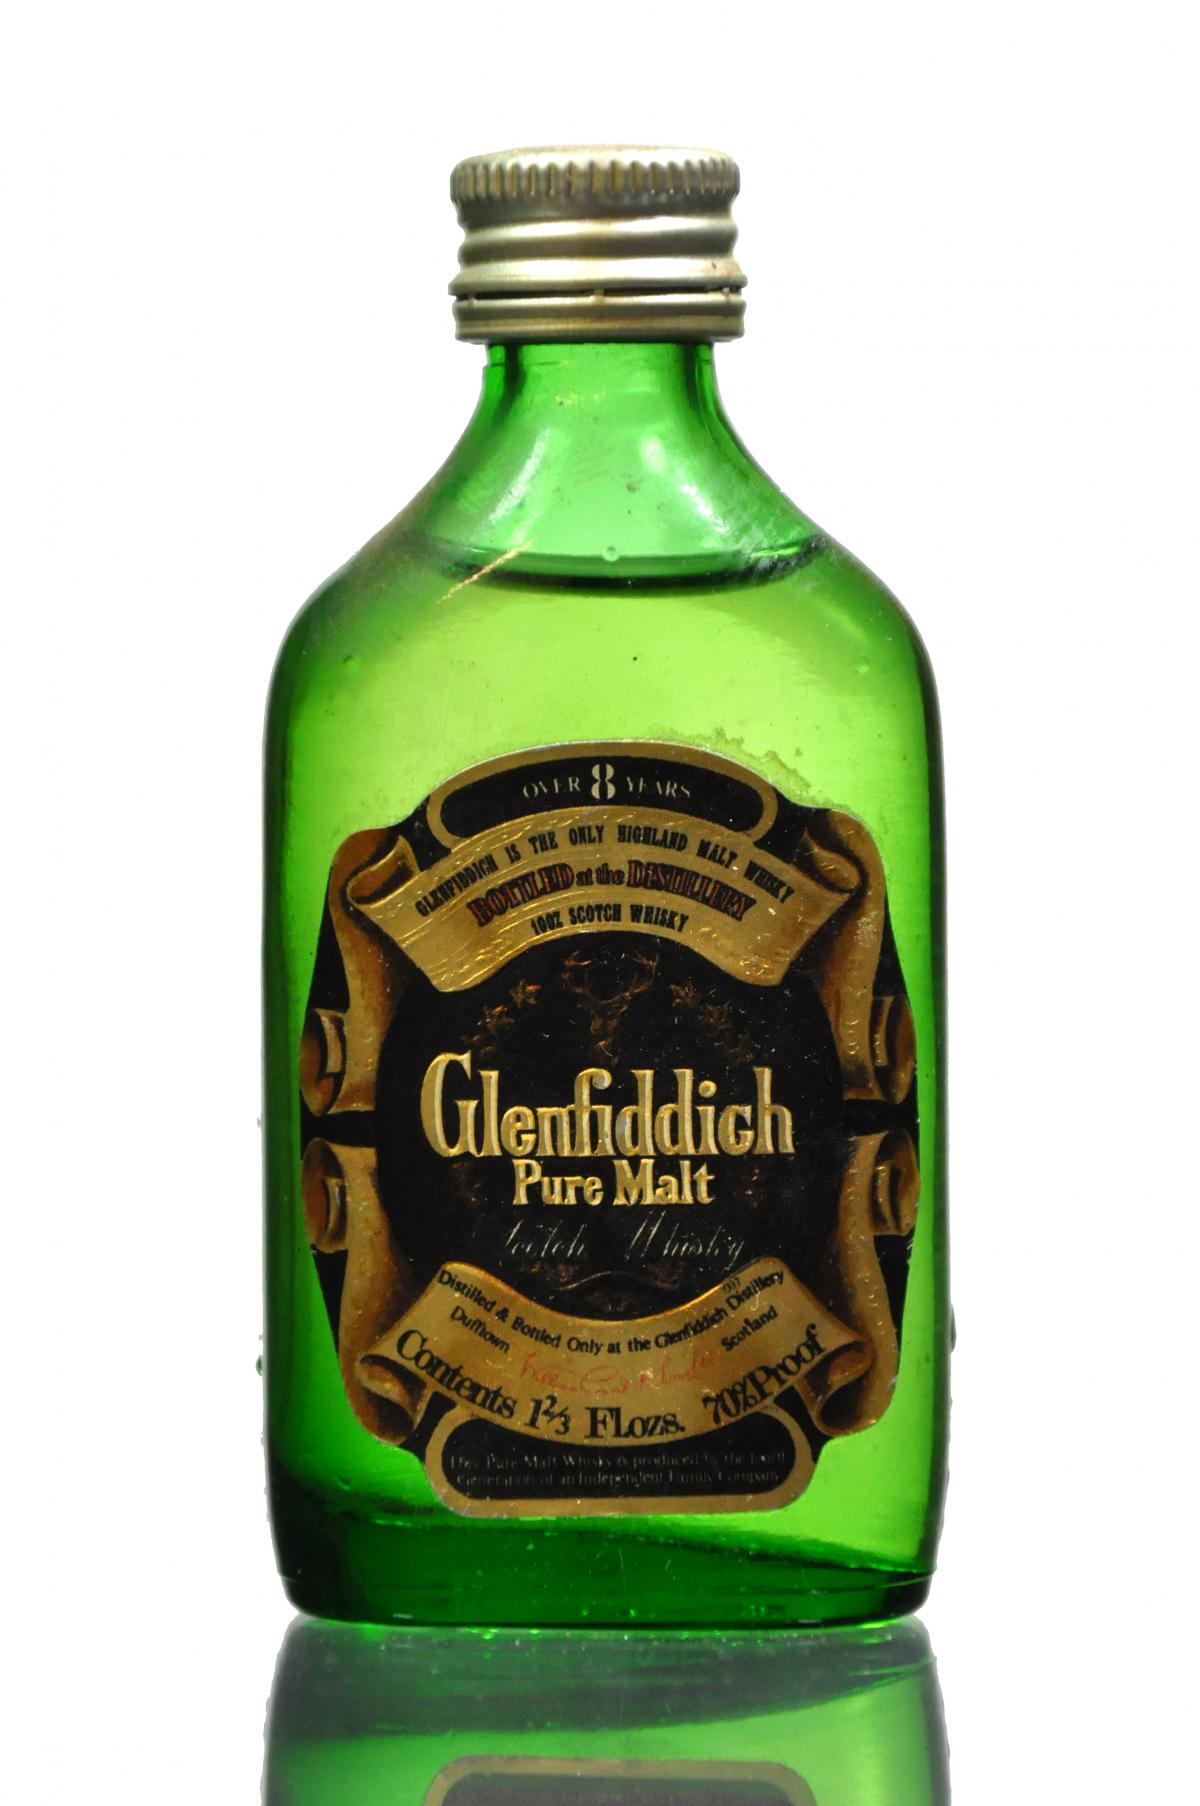 Glenfiddich 8 Year Old - 70 Proof Miniature